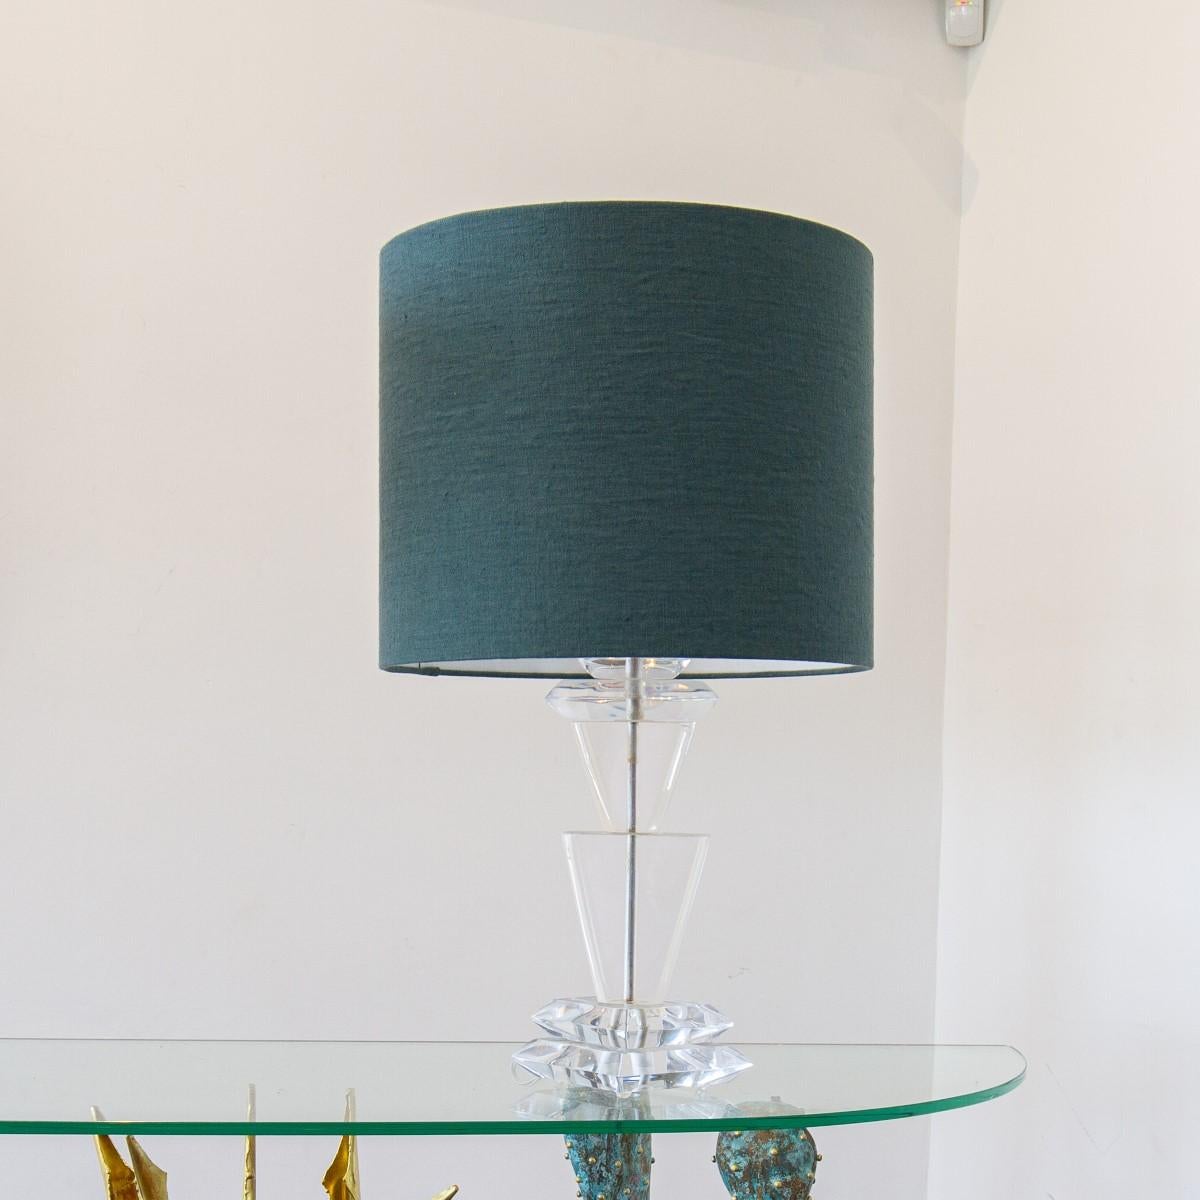 Pair of chunky sculptural Lucite table lamps designed by Van Teal, 1970s, Etched Signature 

Deep green shades included

Hivo Van Teal started the Van Teal company making Lucite or acrylic sculptures and works of art until they moved to